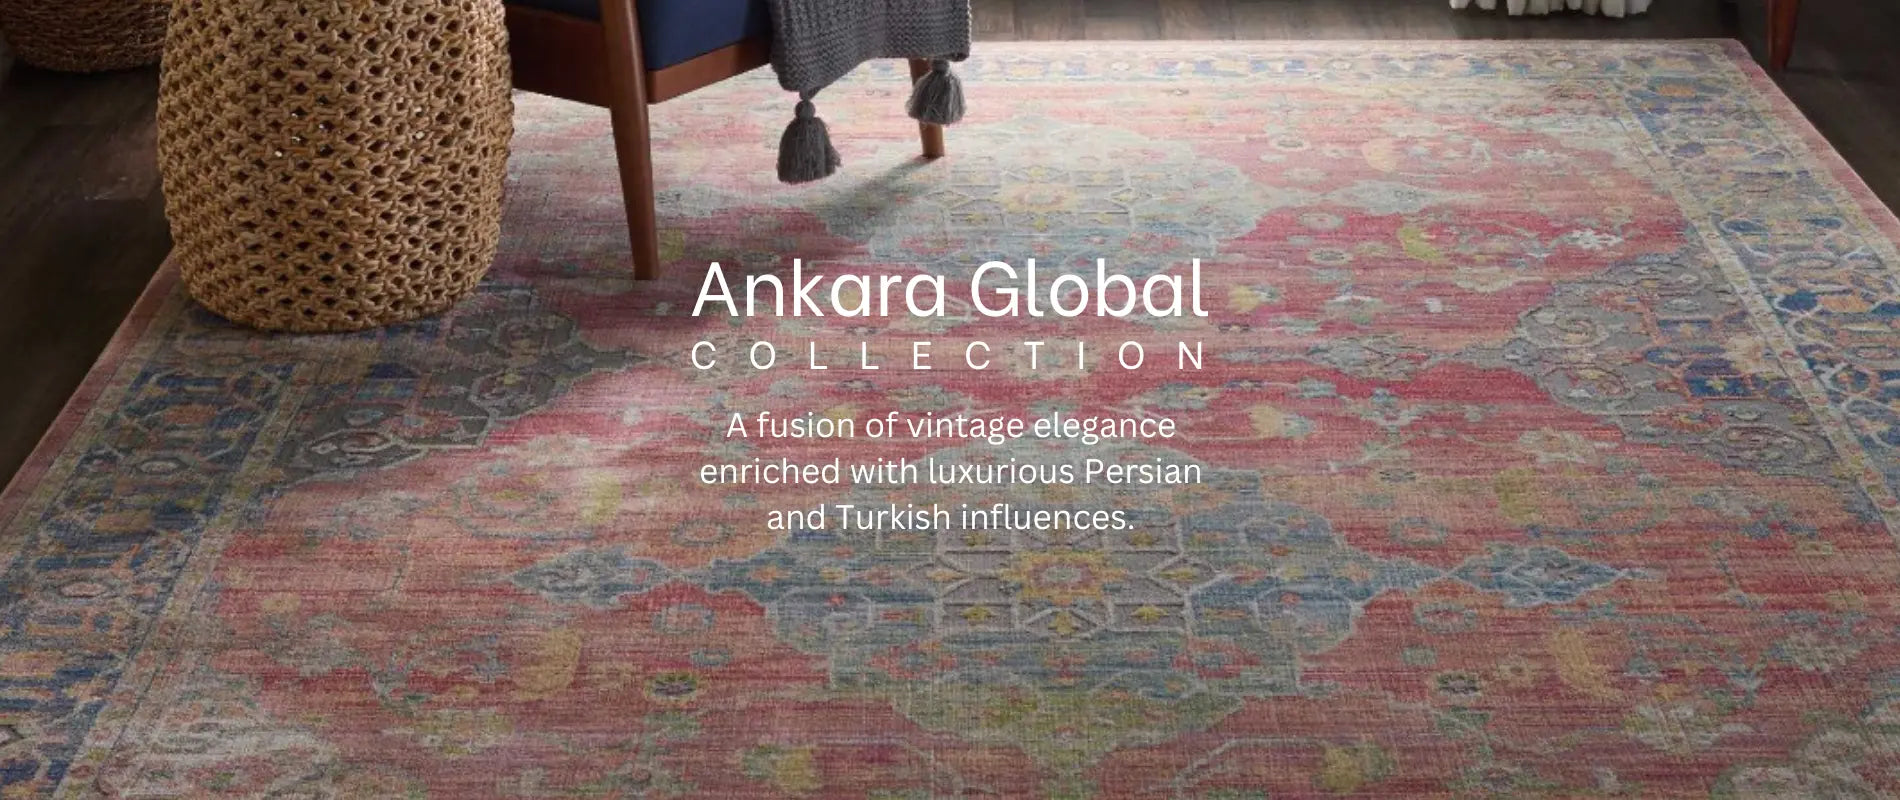 Vintage-inspired Ankara Global collection featuring ornate Persian and Turkish rug designs with rich colors, silky textures, and intricate patterns for a global home aesthetic